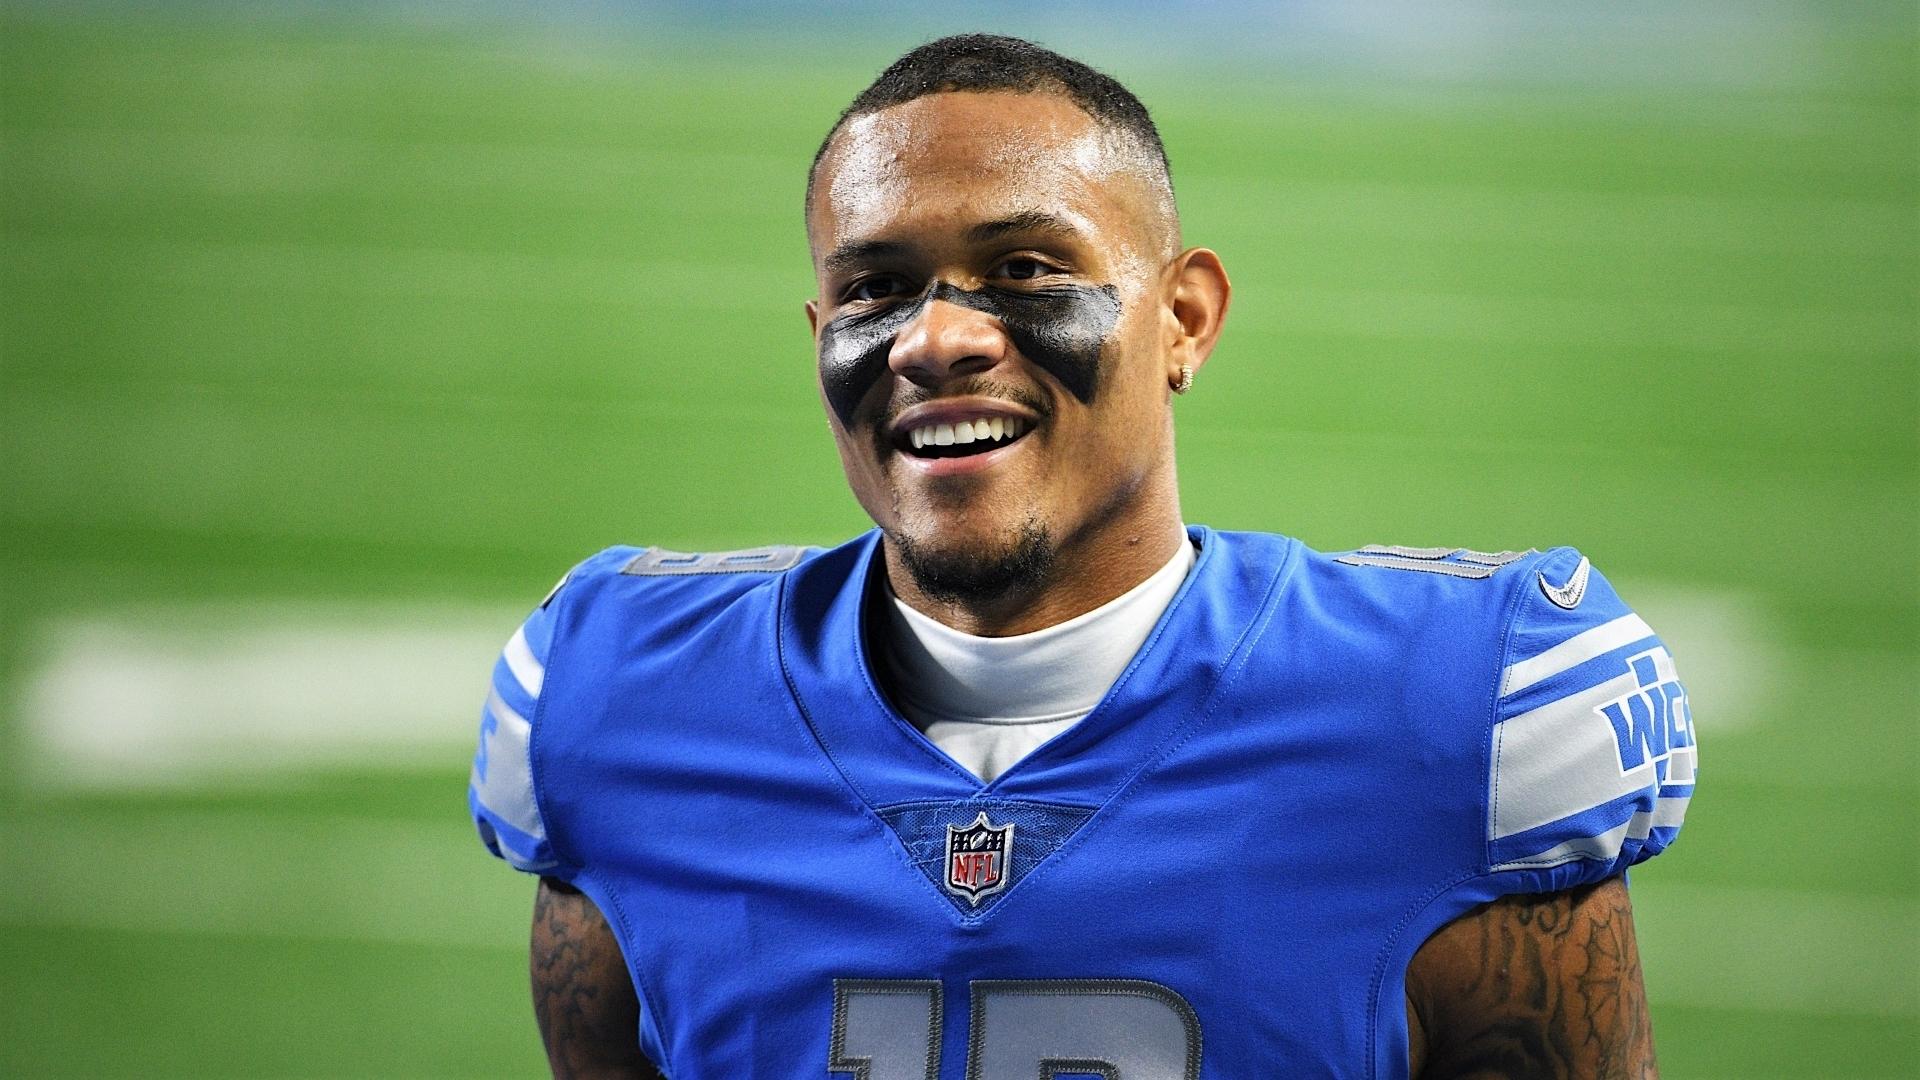 Oct 4, 2020; Detroit, Michigan, USA; Detroit Lions wide receiver Kenny Golladay (19) before the game against the New Orleans Saints at Ford Field. Mandatory Credit: Tim Fuller-USA TODAY Sports / © Tim Fuller-USA TODAY Sports